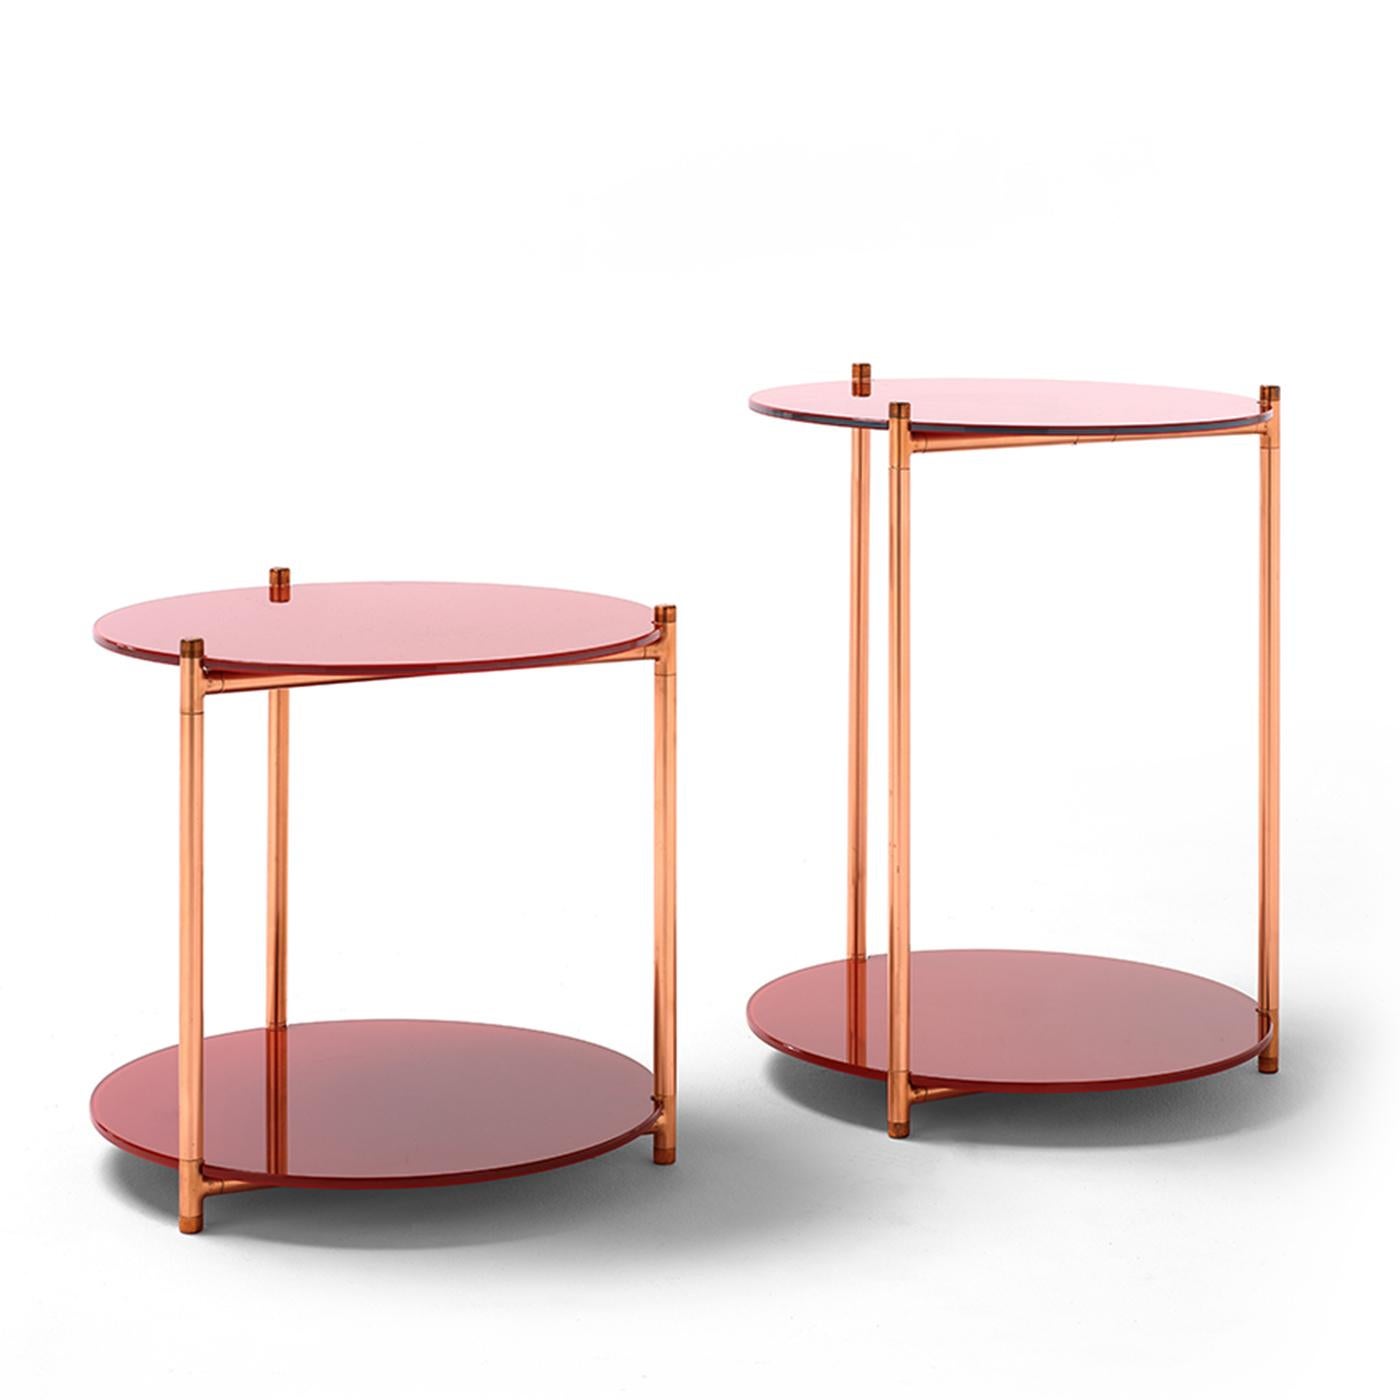 The playful yet refined character of this side table will add a sophisticated accent to any decor. Three vertical, cylindrical elements made of steel on the inside and copper on the outside connect the two back-painted glass panels, creating ample